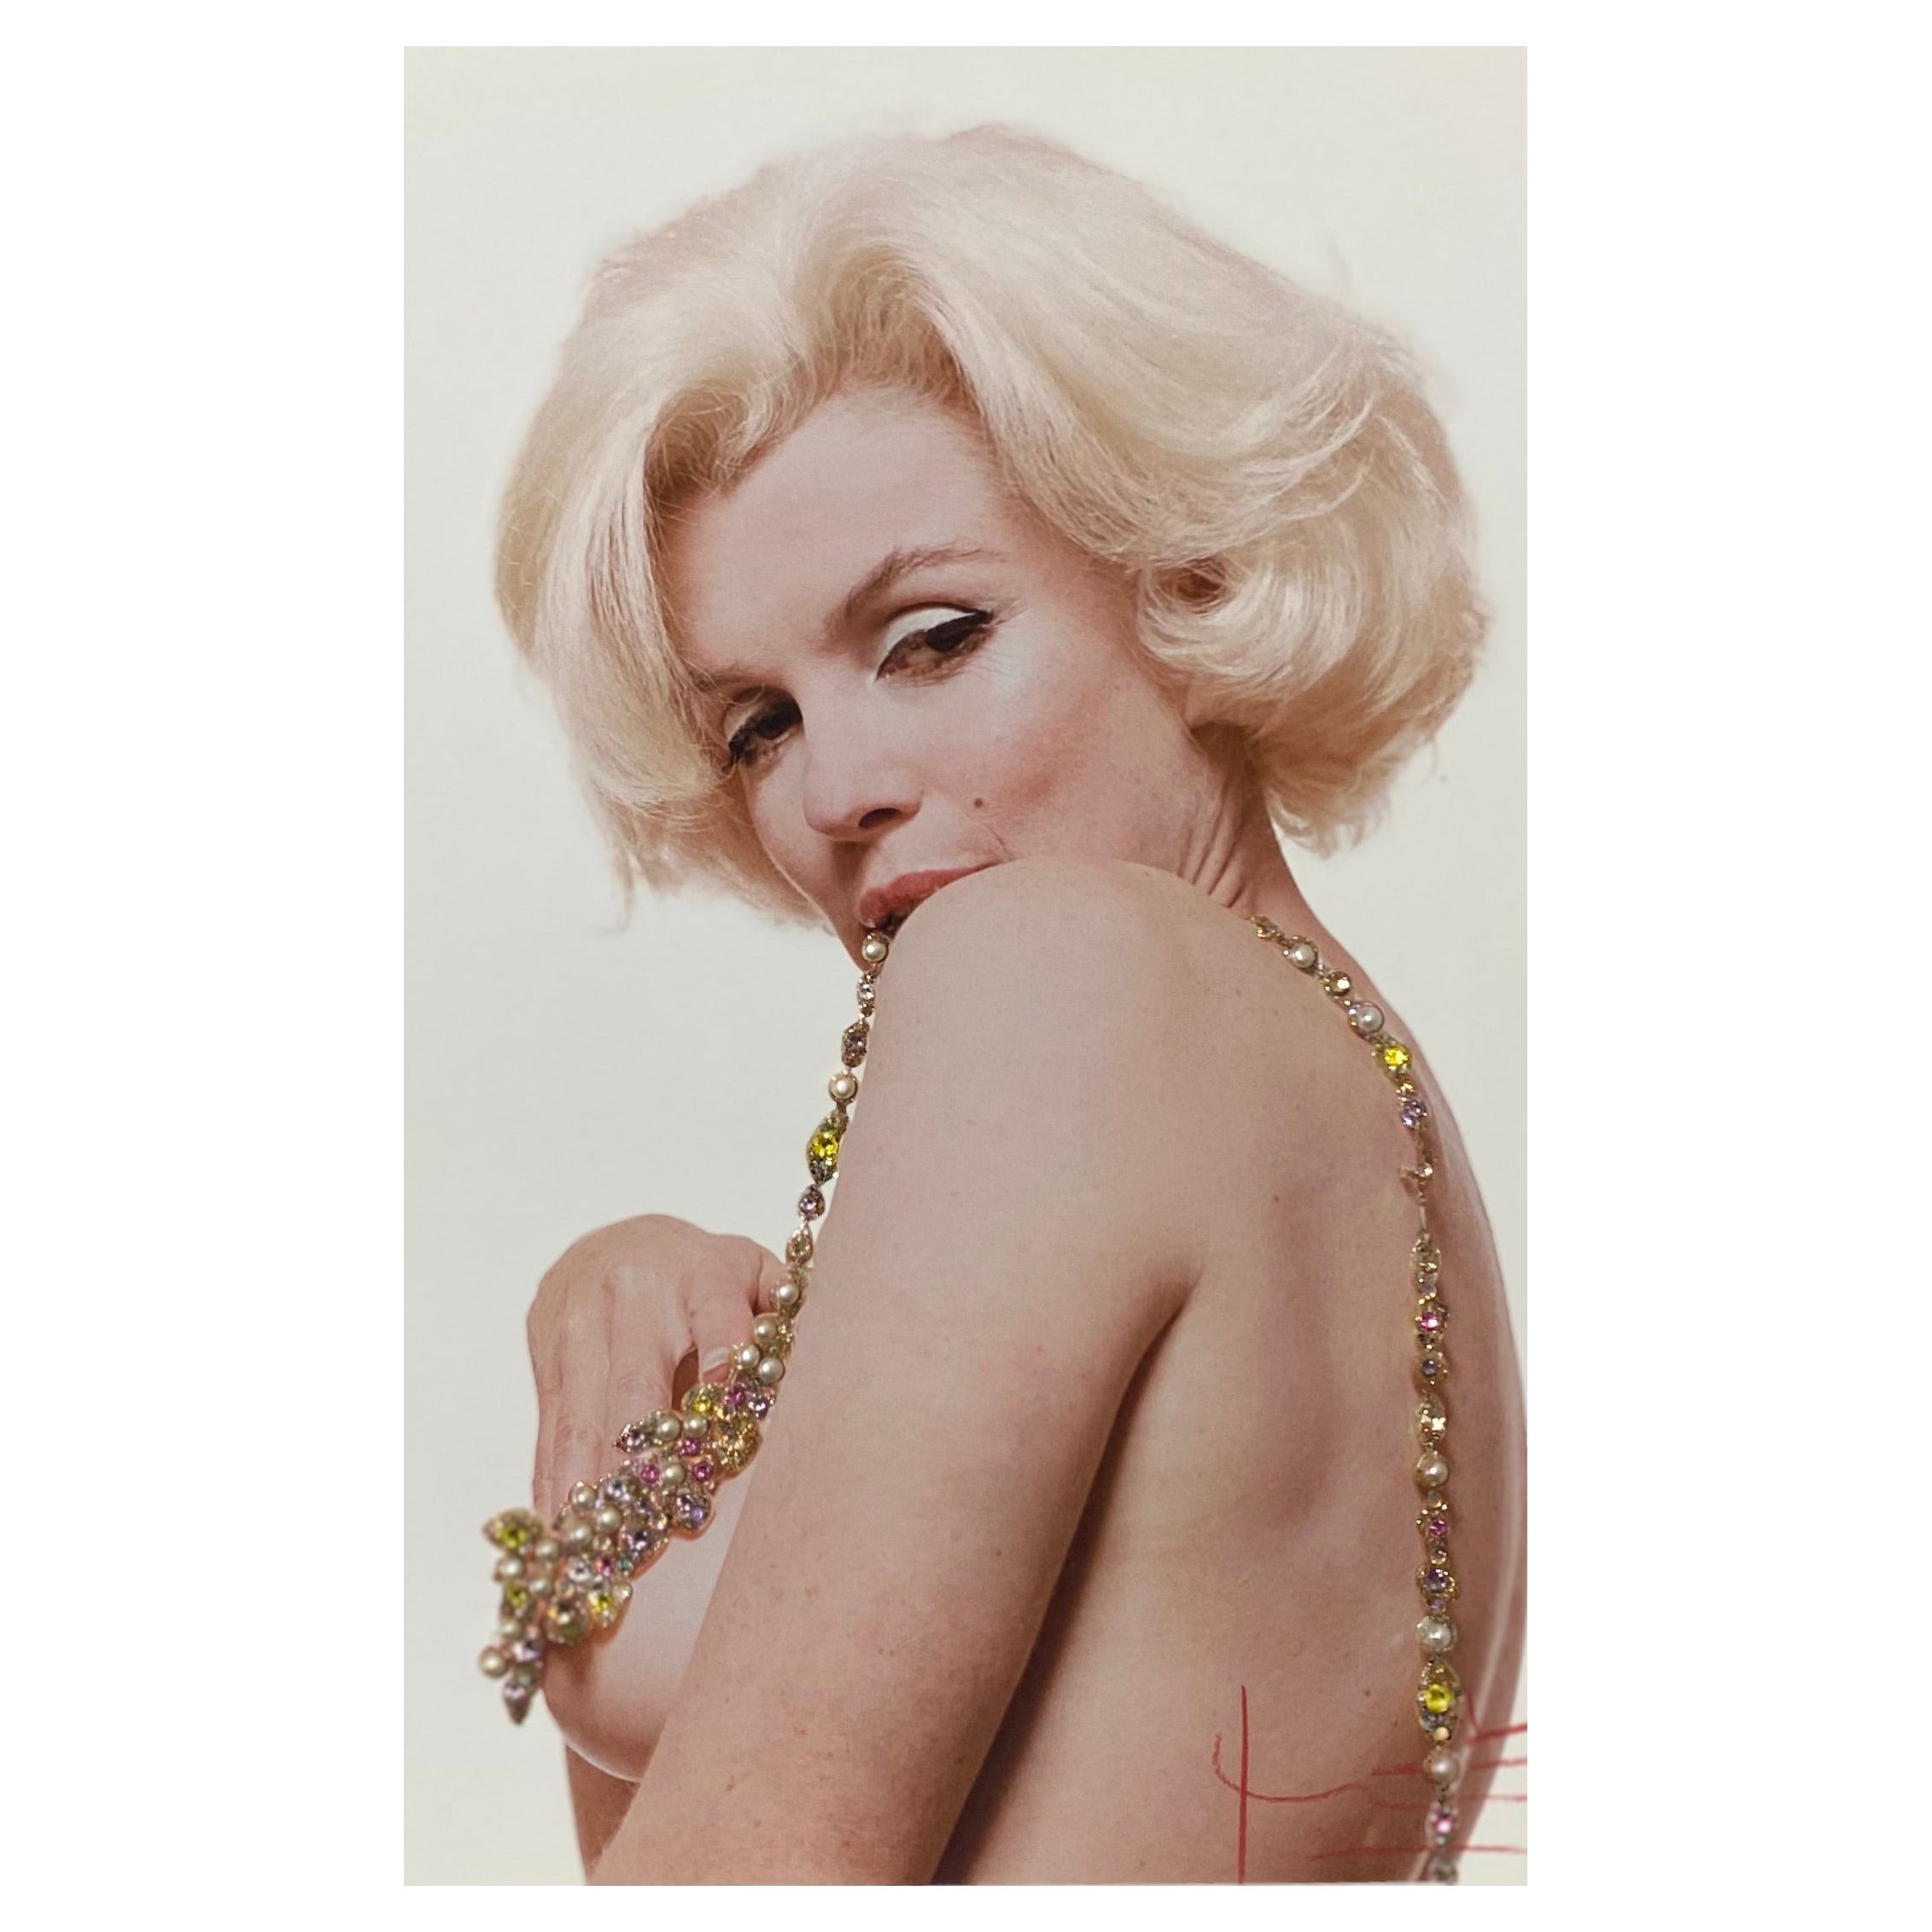 Bert Stern "Marilyn New Boob Smile Jeweled" Photograph of Mr. Monroe For Sale